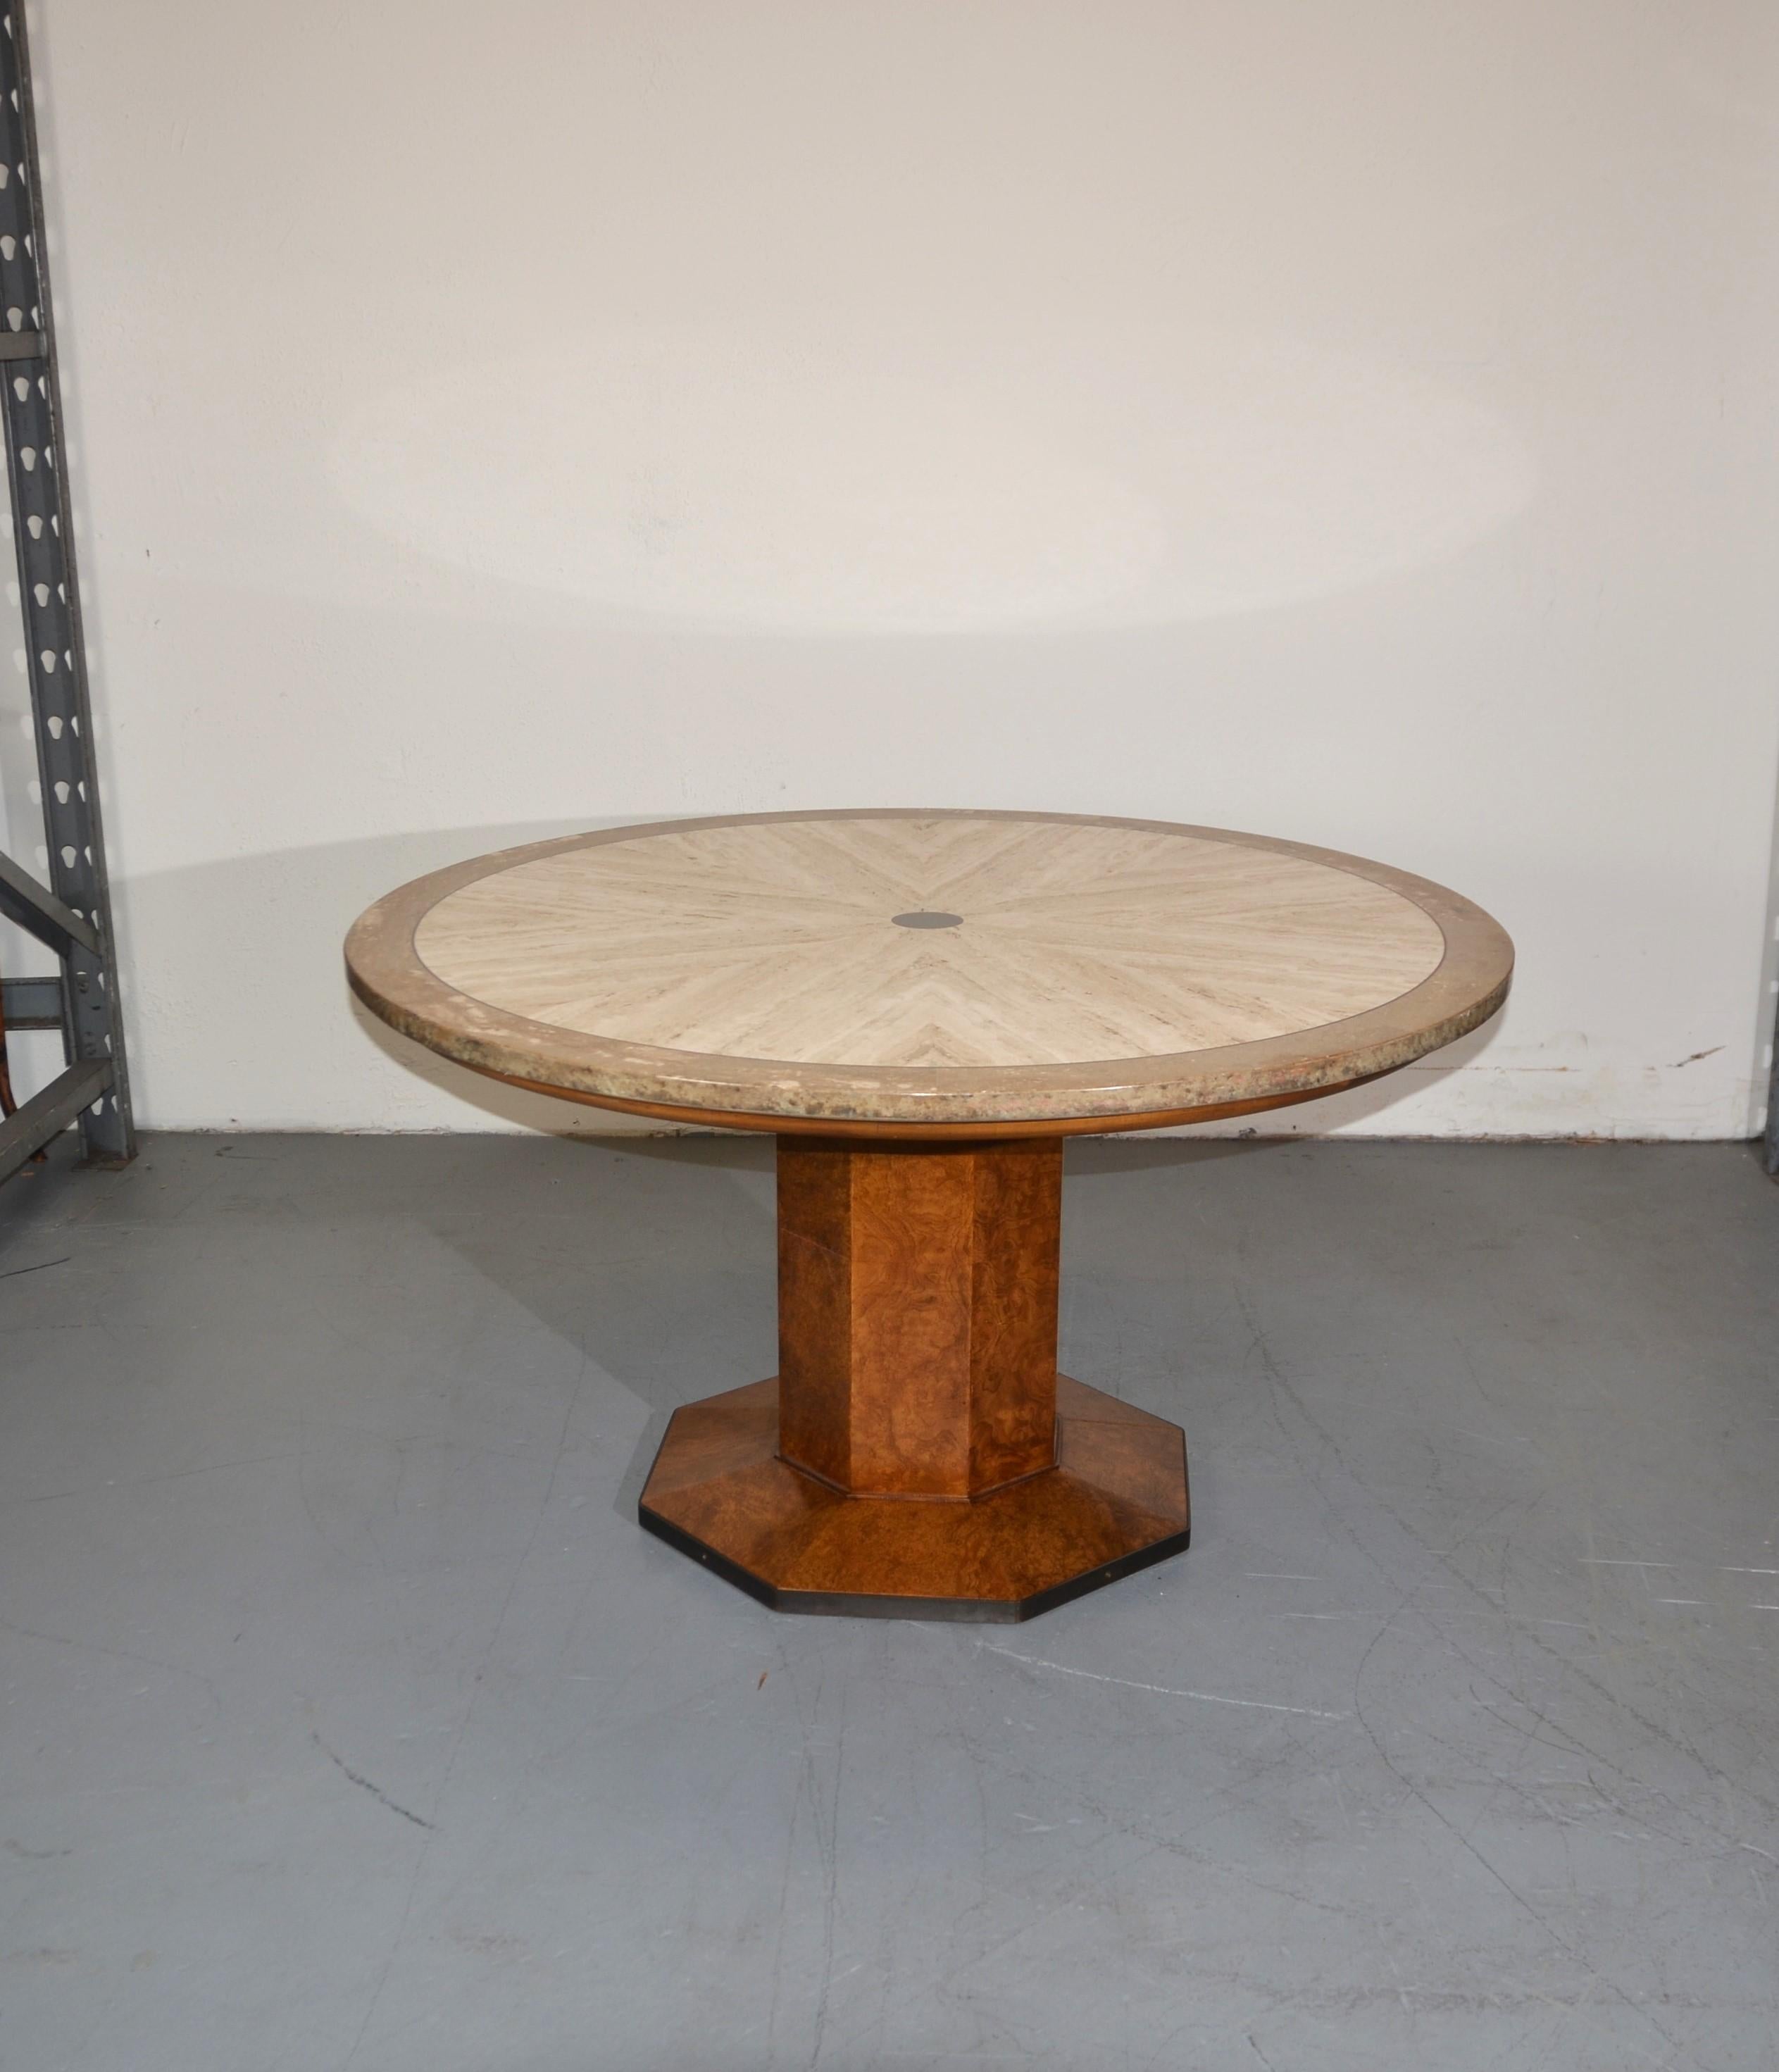 Game/dining table by John Widdicomb. The travertine top rests on a burl wood pedestal base.